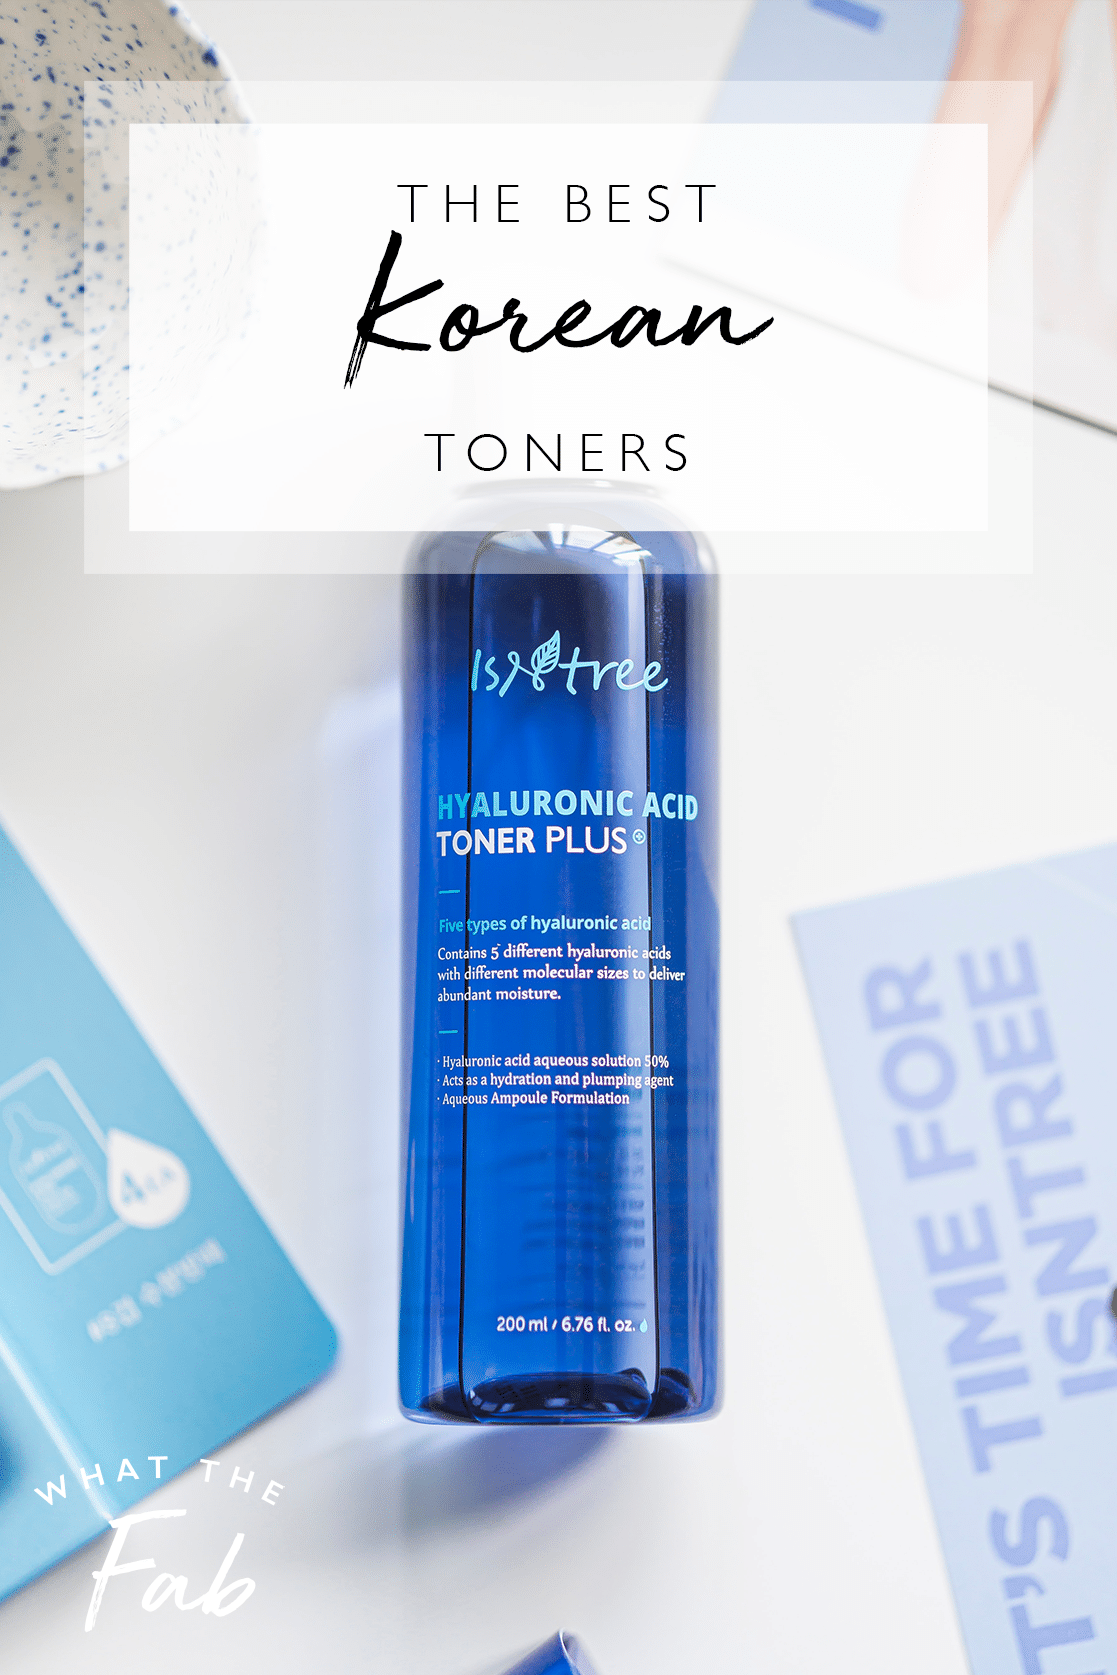 Best Korean Toners, by What The Fab